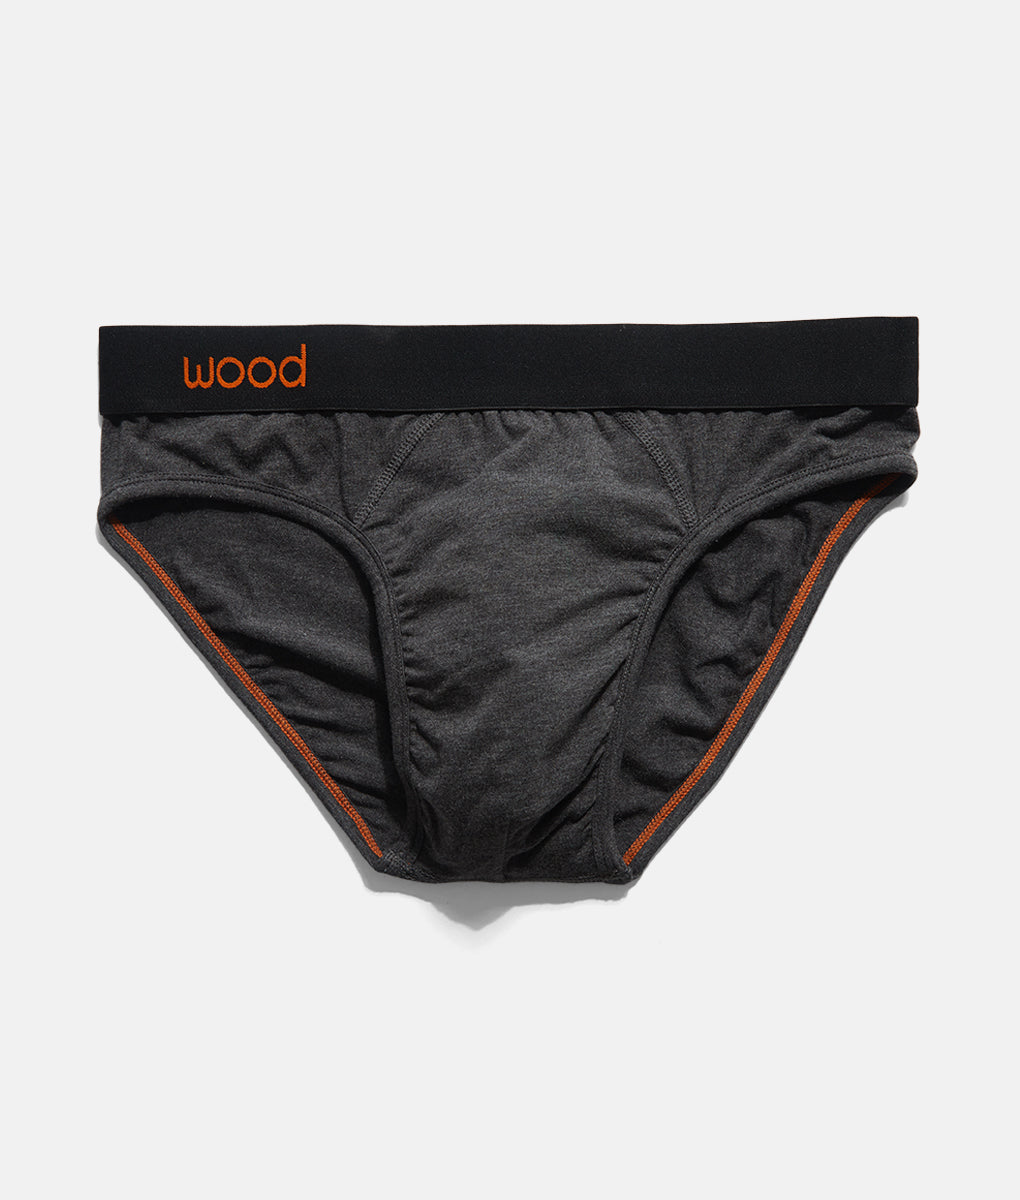 Wood Underwear on X: Why do men love Wood? In brief, they're